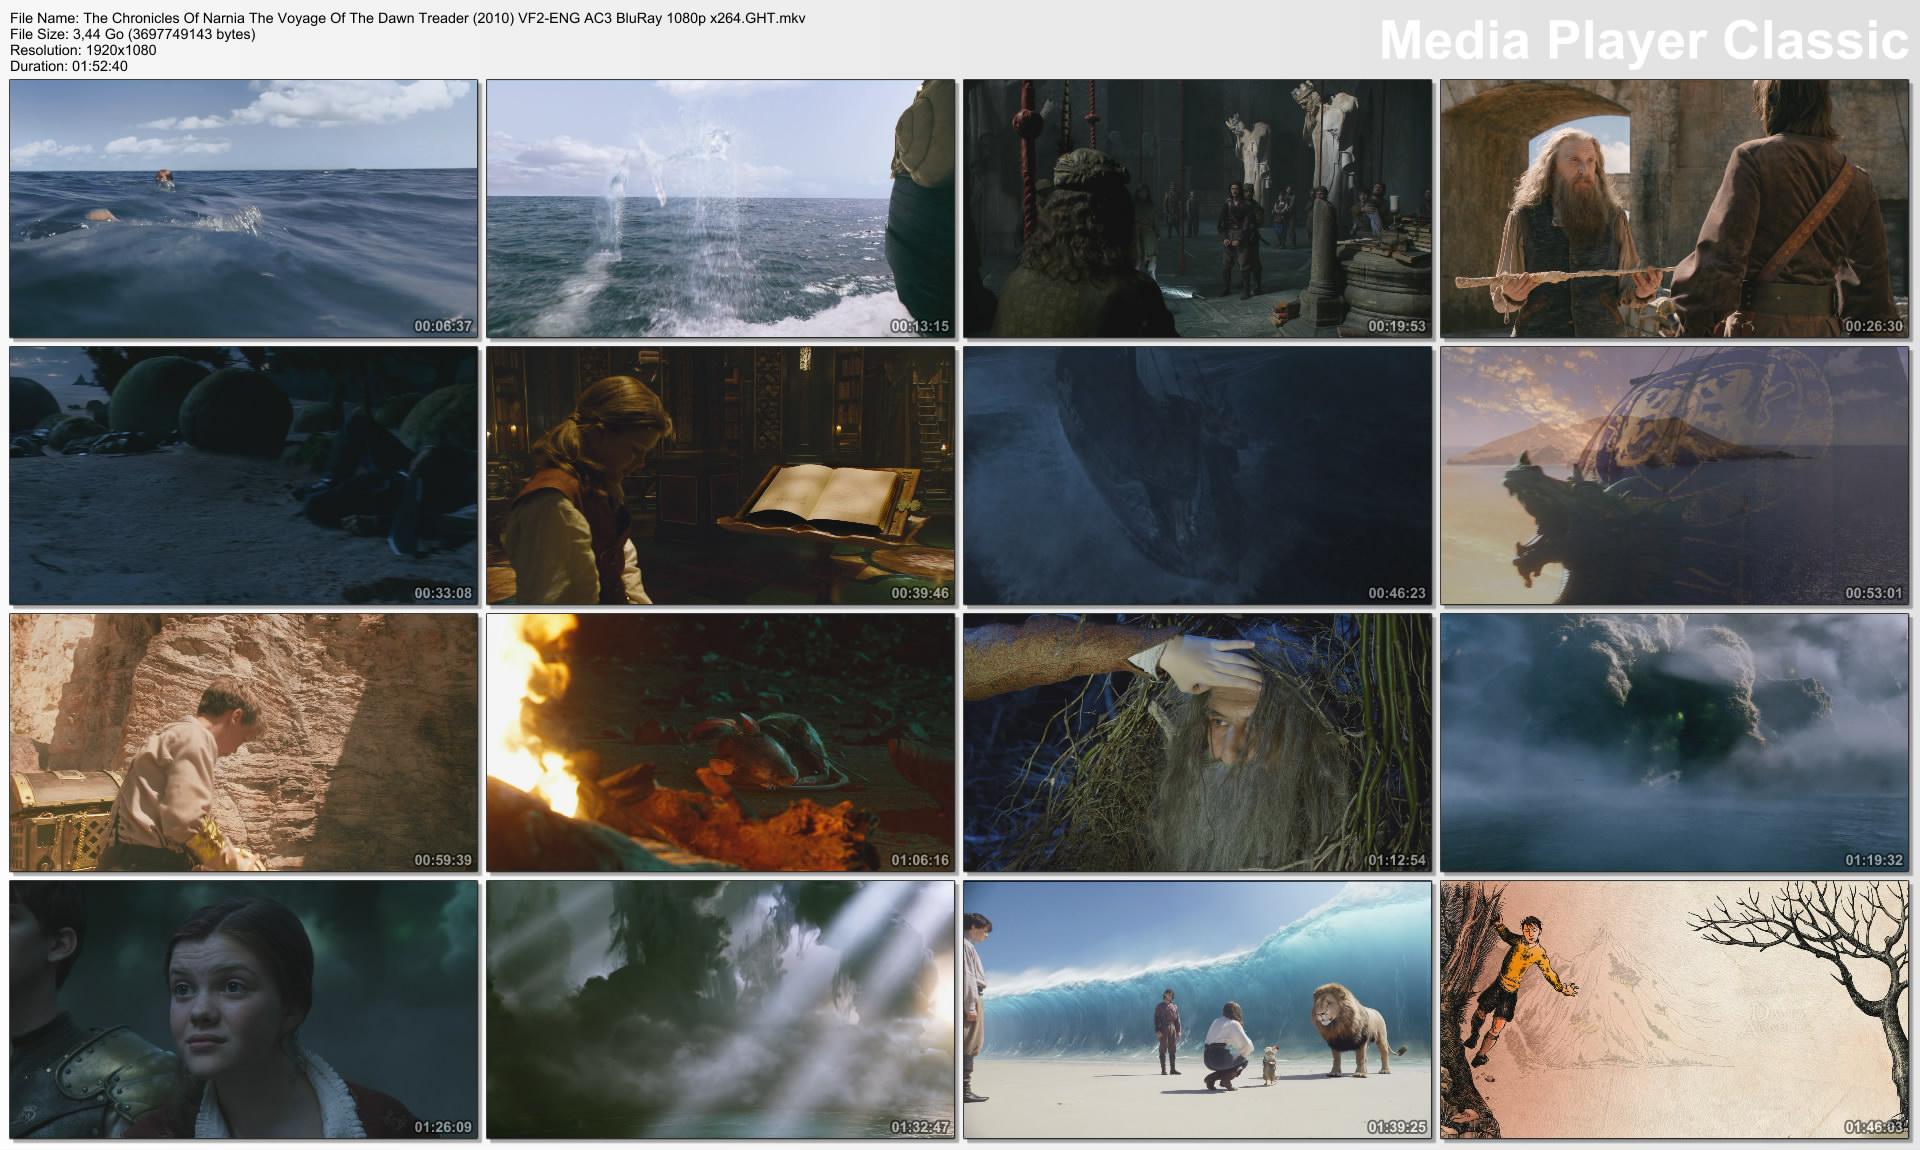 The Chronicles Of Narnia The Voyage Of The Dawn Treader (2010) VF2-ENG AC3 BluRay 1080p x264.GHT